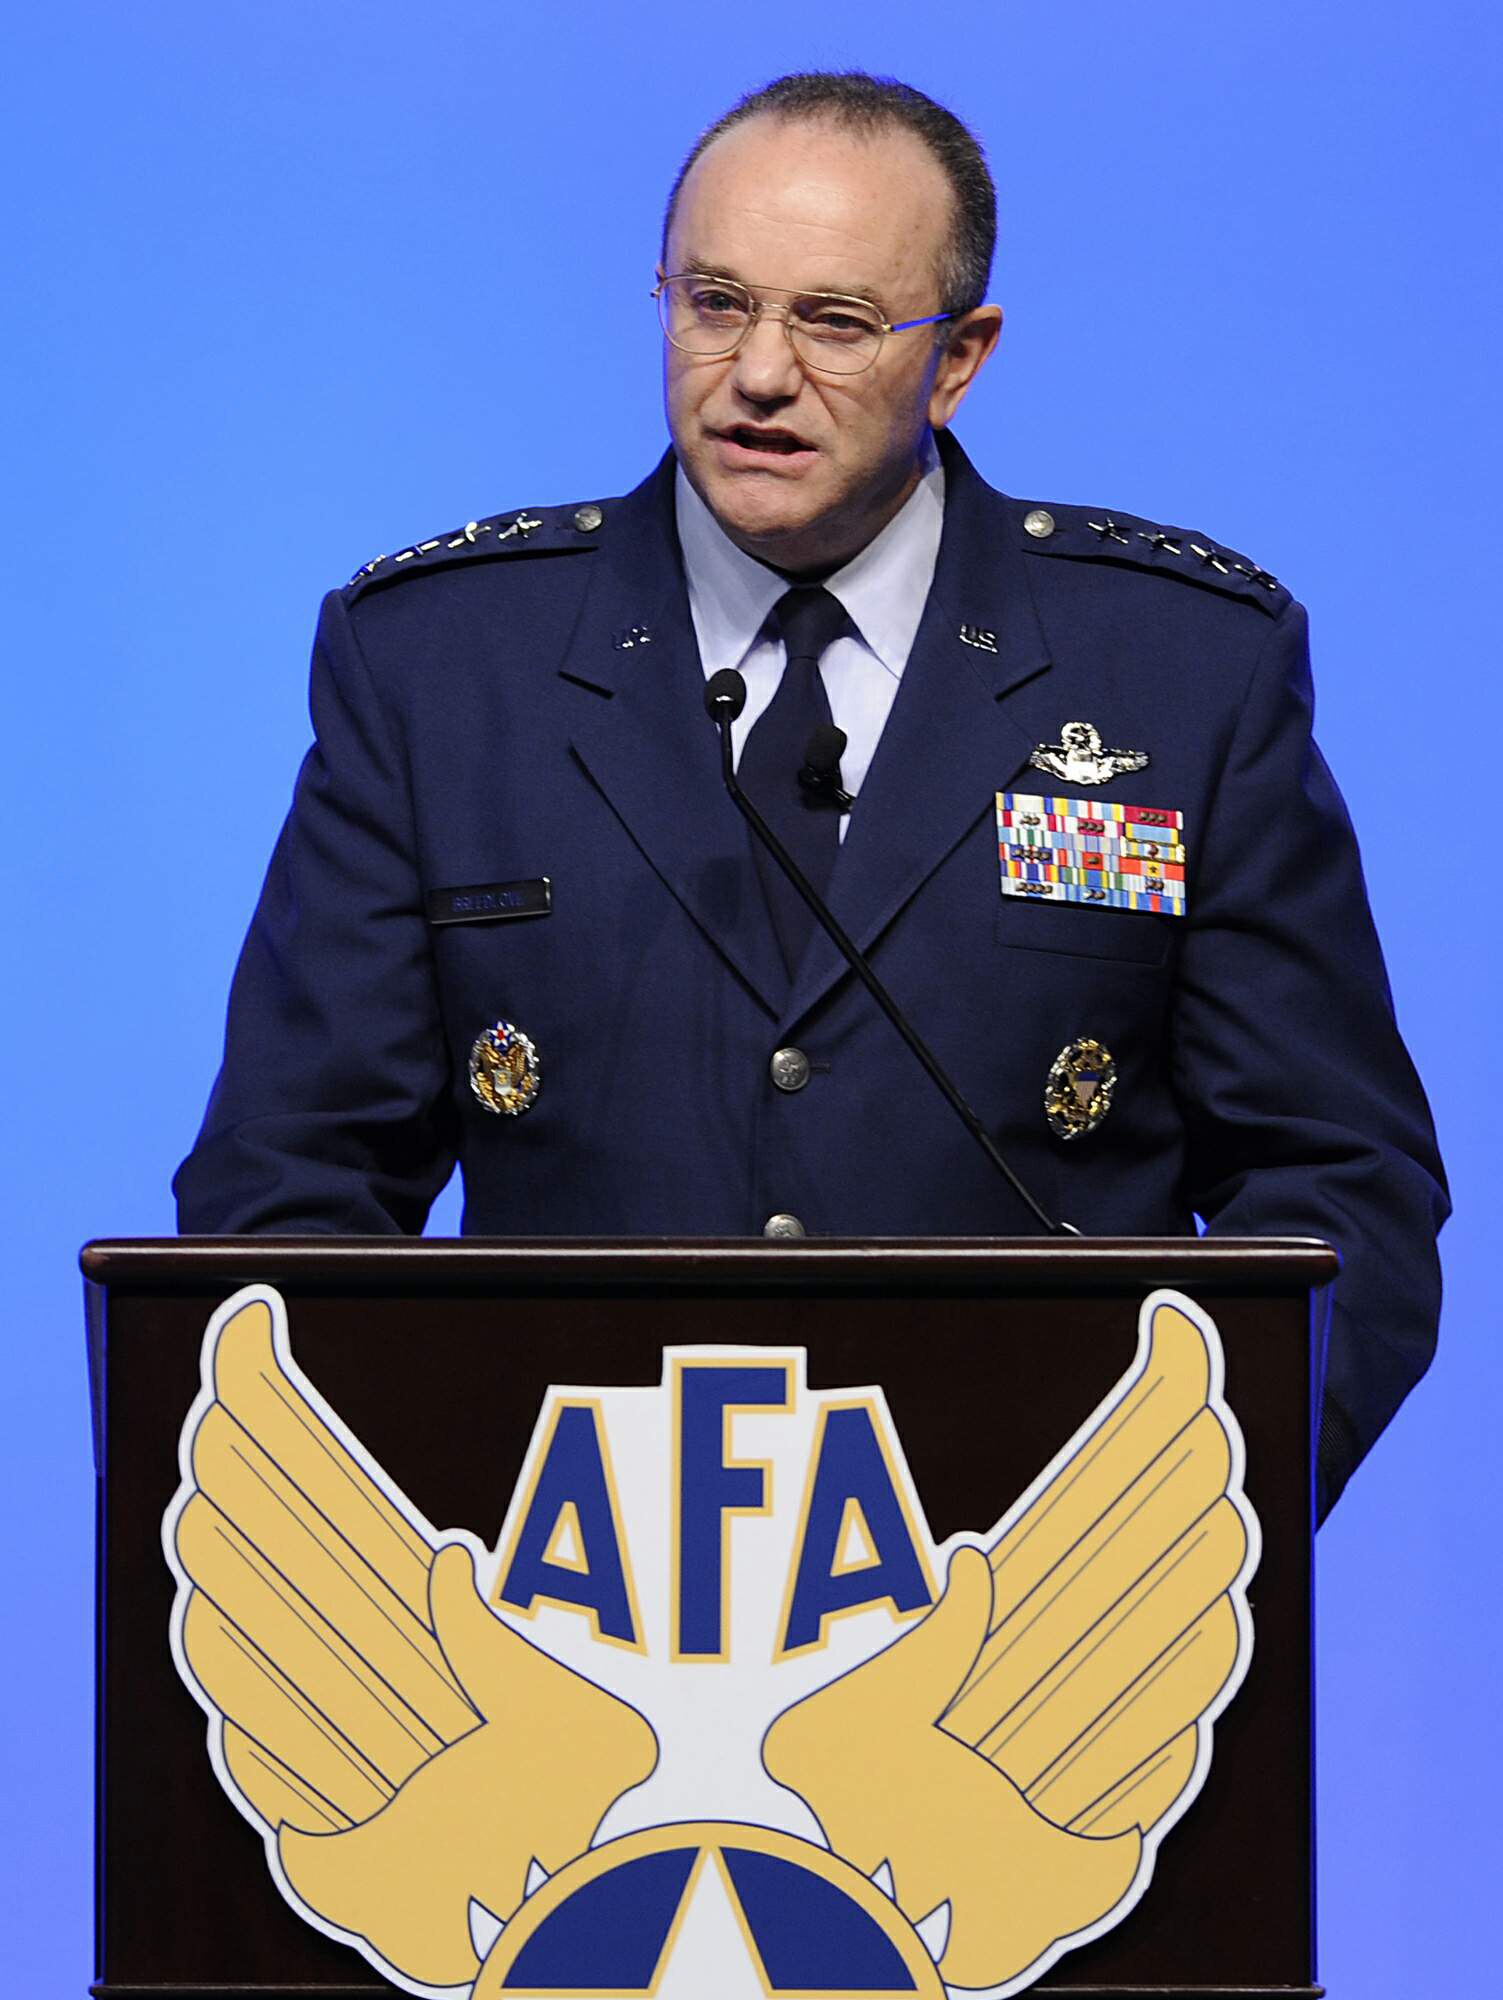 Air Force Vice Chief of Staff Gen. Philip M. Breedlove speaks Feb. 17, 2011, during the Air Force Association's 2011 Air Warfare Symposium and Technology Exposition in Orlando, Fla. General Breedlove talked about the Air Force's future during an era of dwindling budgetary resources. (U.S. Air Force photo/Scott M. Ash)